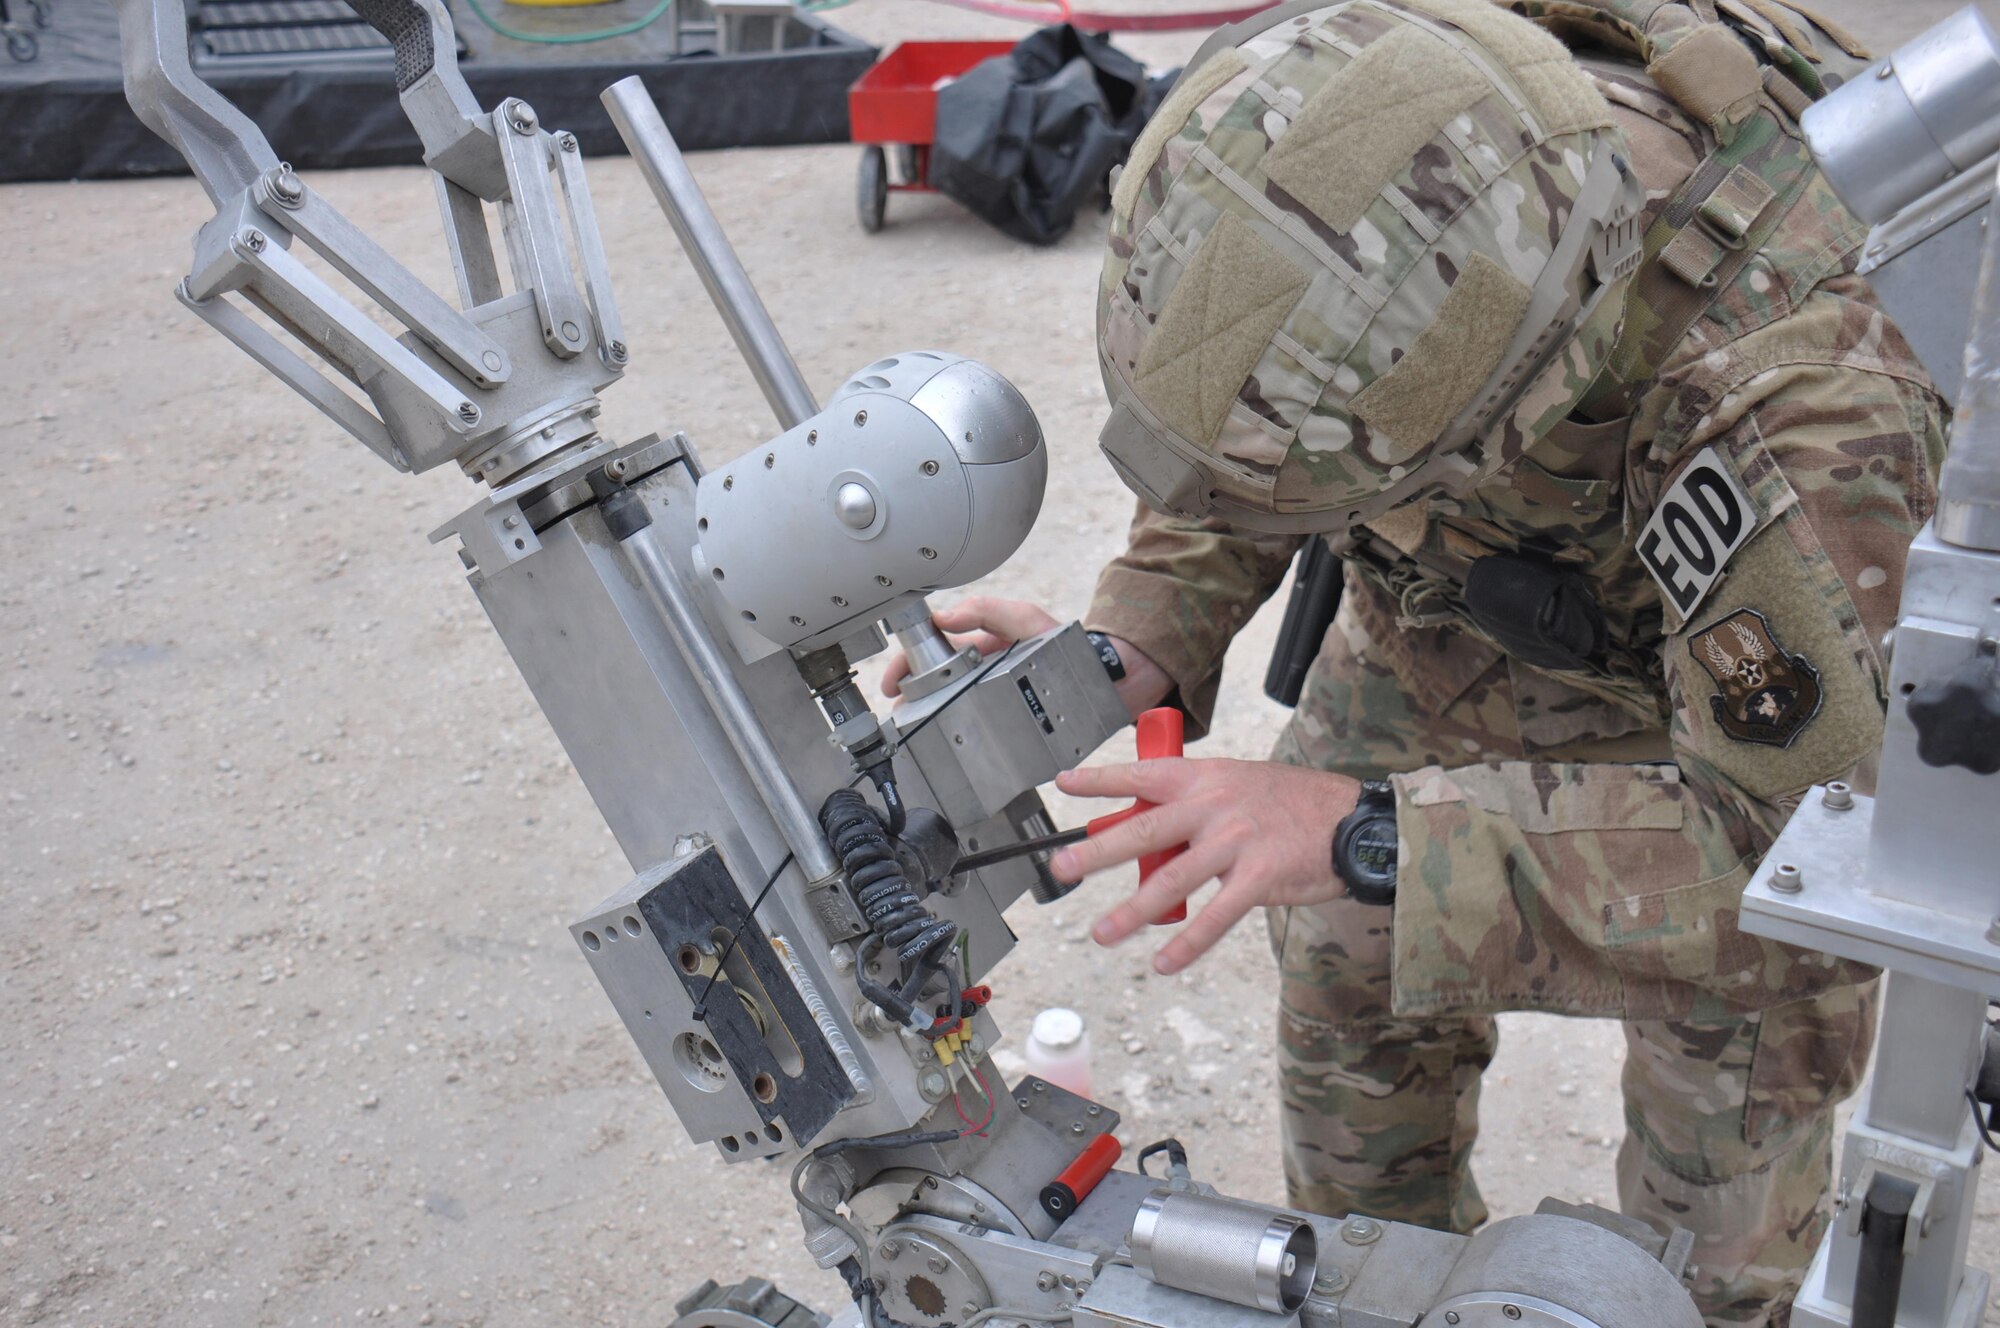 Staff Sgt. Jordan Burger, 379th Expeditionary Civil Engineer Squadron explosive ordnance craftsman, preps an F-6 robot to search for mock explosives during a hazardous materials exercise at Al Udeid Air Base, Qatar March 16. The training exercise provided first responders an opportunity to practice reacting to an emergency incident. Several emergency personnel participated in the exercise including security forces and medics. (U.S. Air Force photo by Tech. Sgt. James Hodgman/Released)